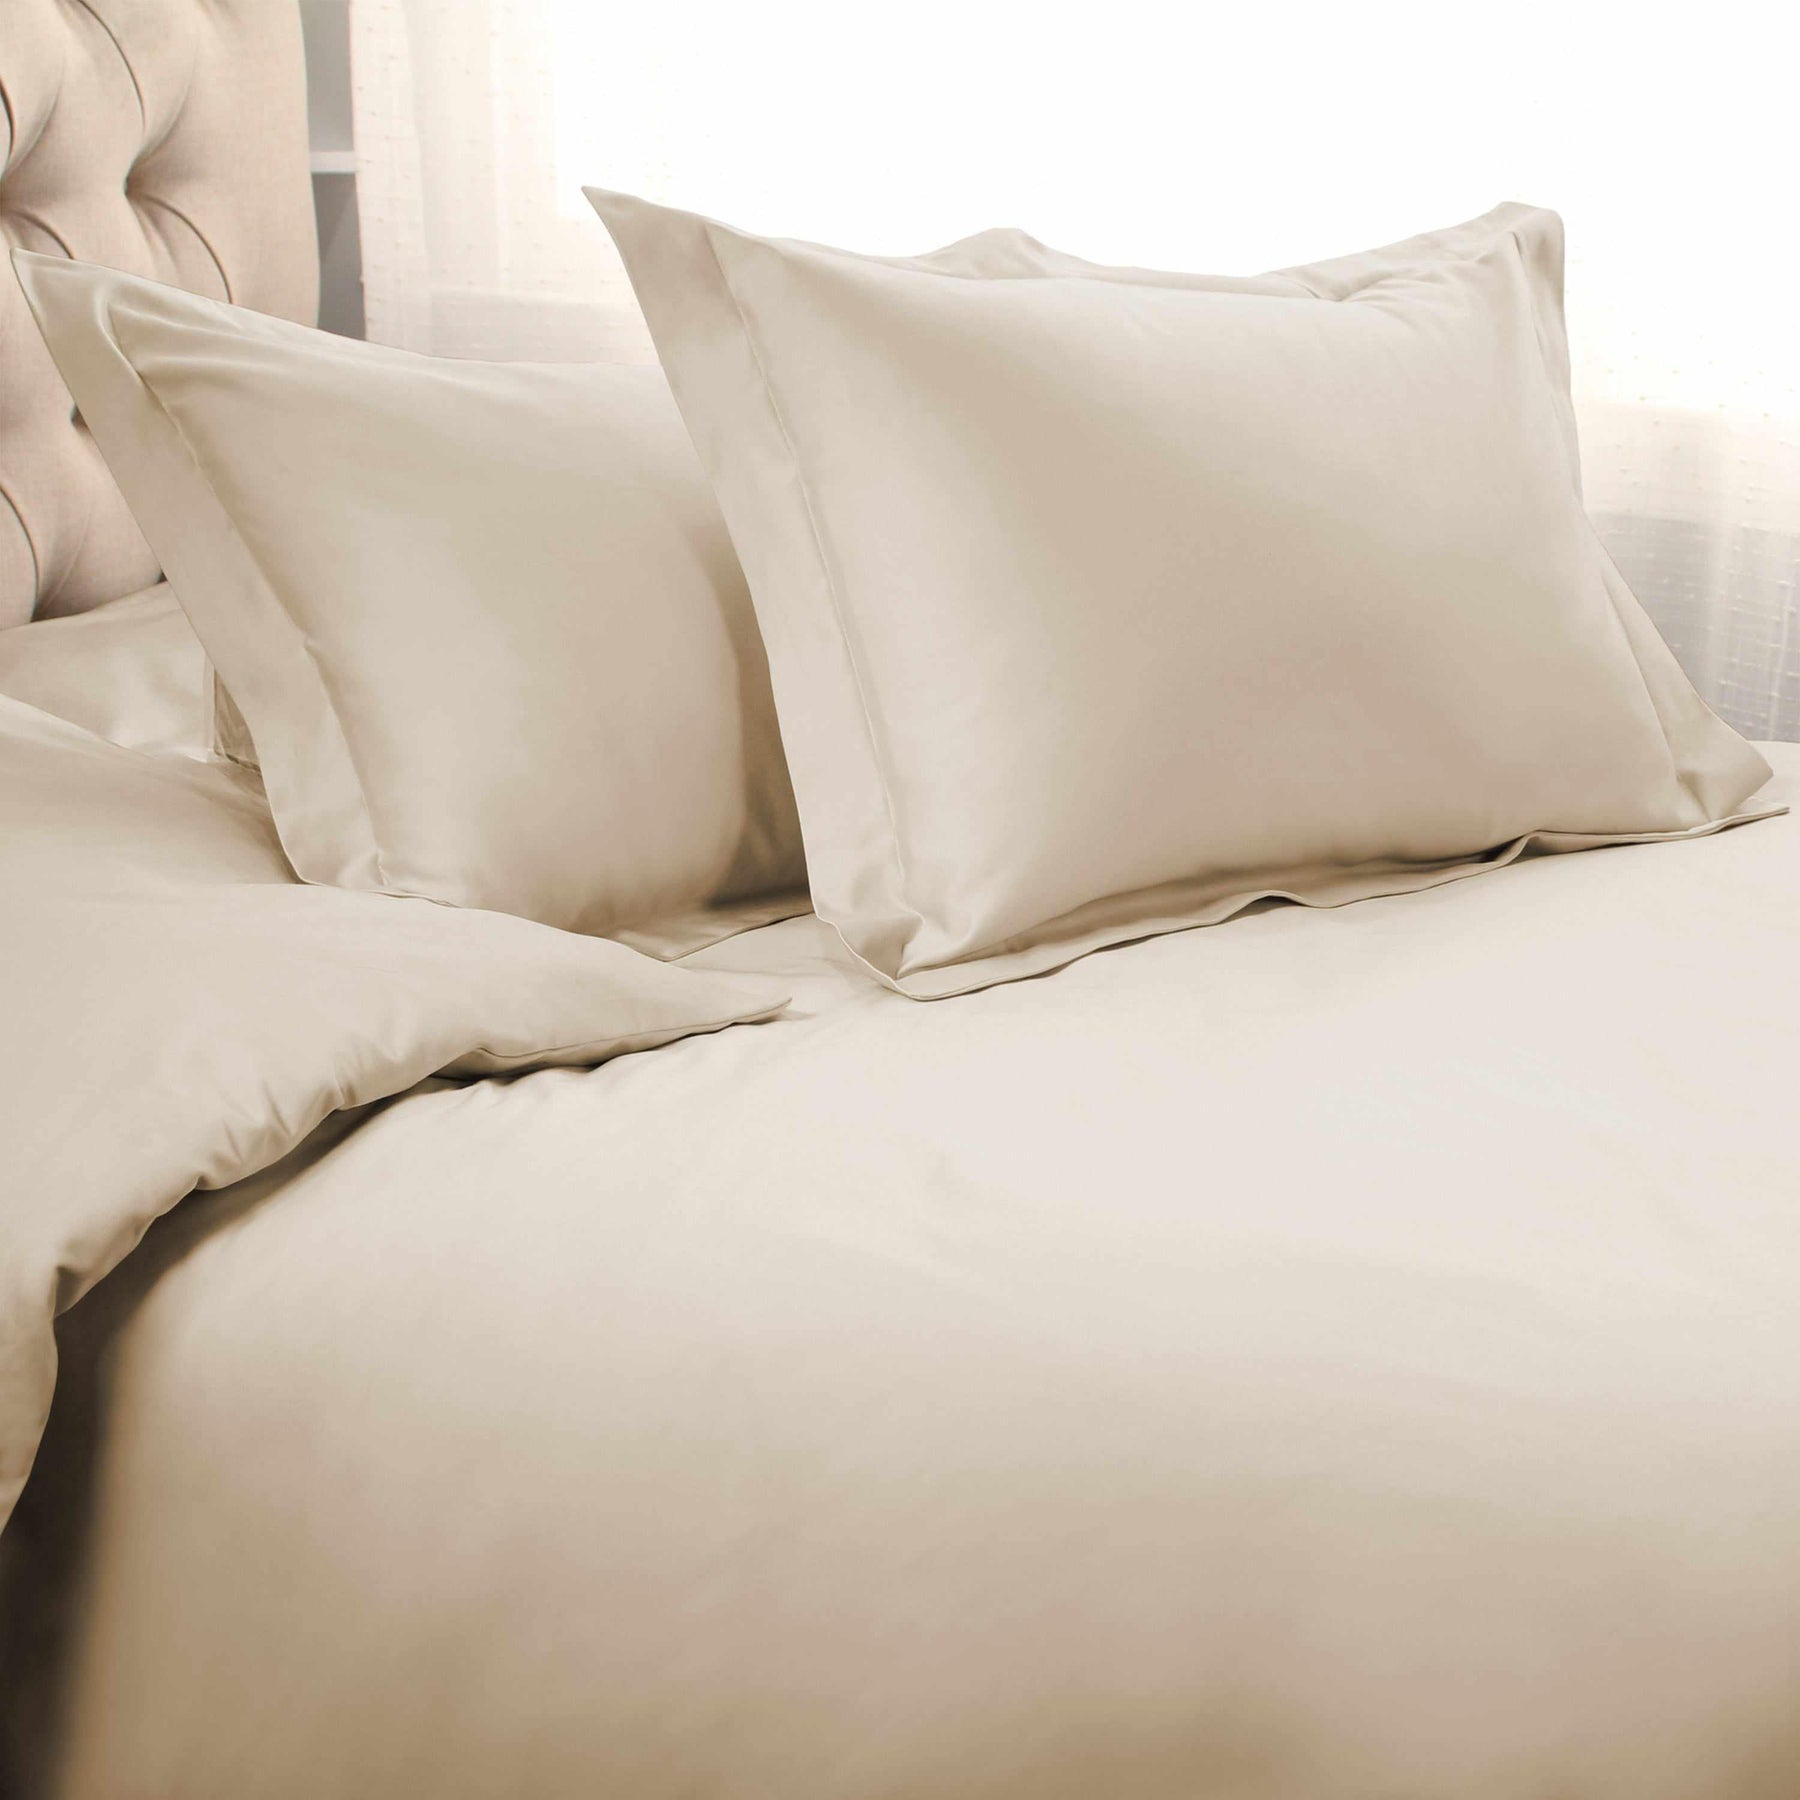  Superior Egyptian Cotton Solid All-Season Duvet Cover Set with Button Closure - Ivory